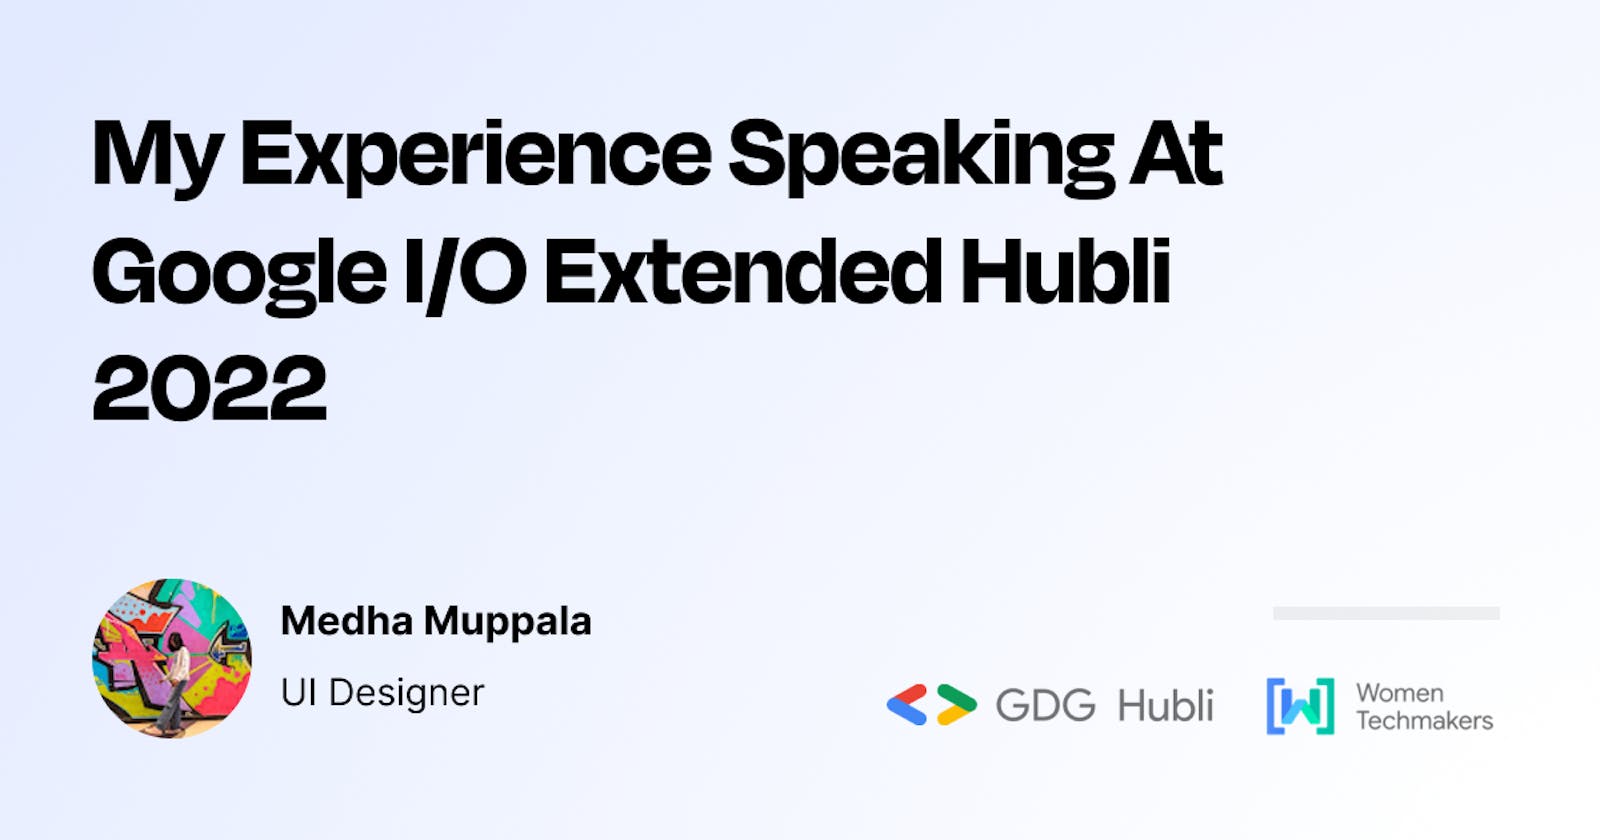 My Experience Speaking At Google I/O Extended Hubli 2022